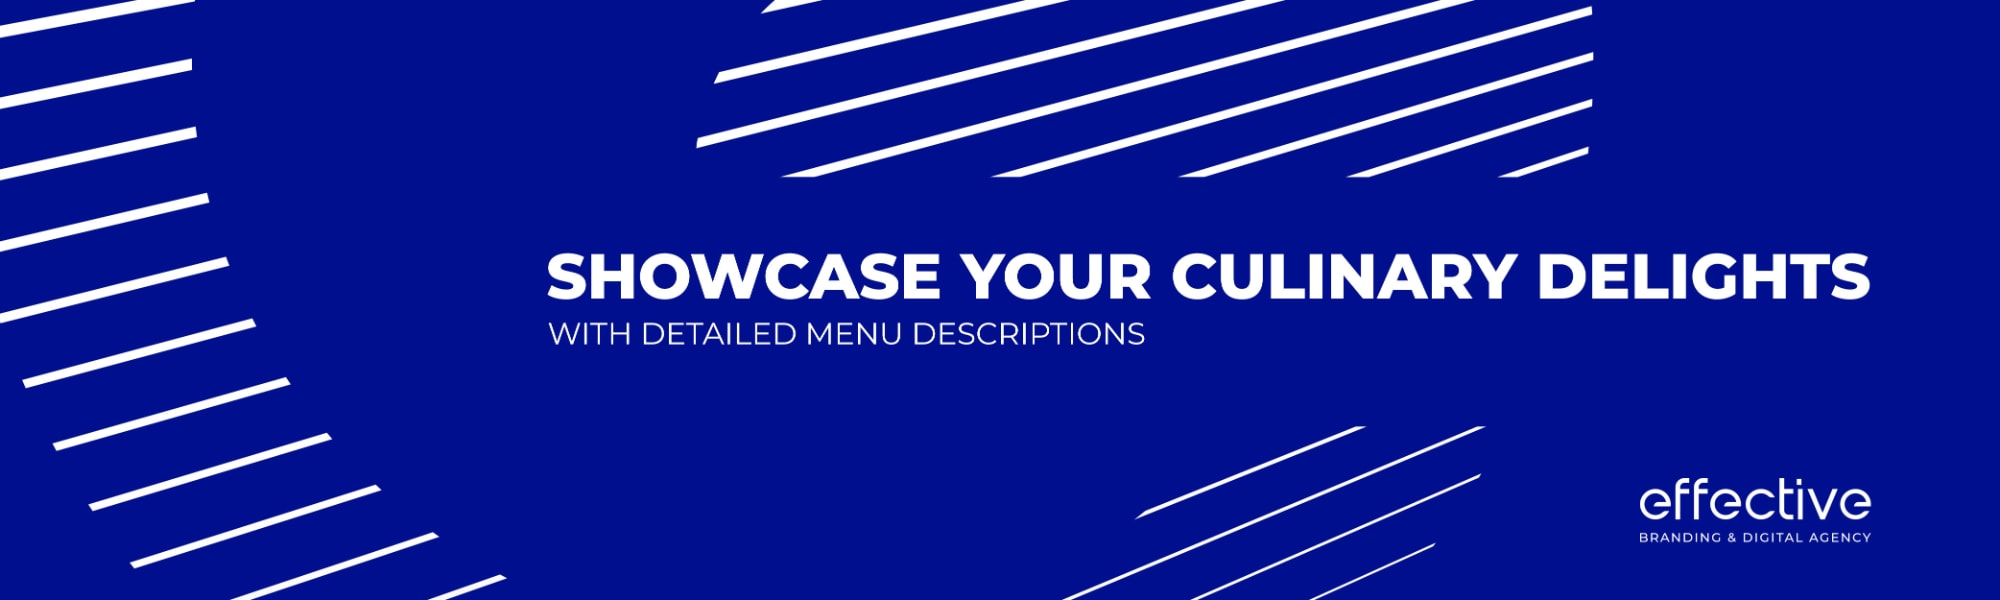 Showcase Your Culinary Delights with Detailed Menu Descriptions